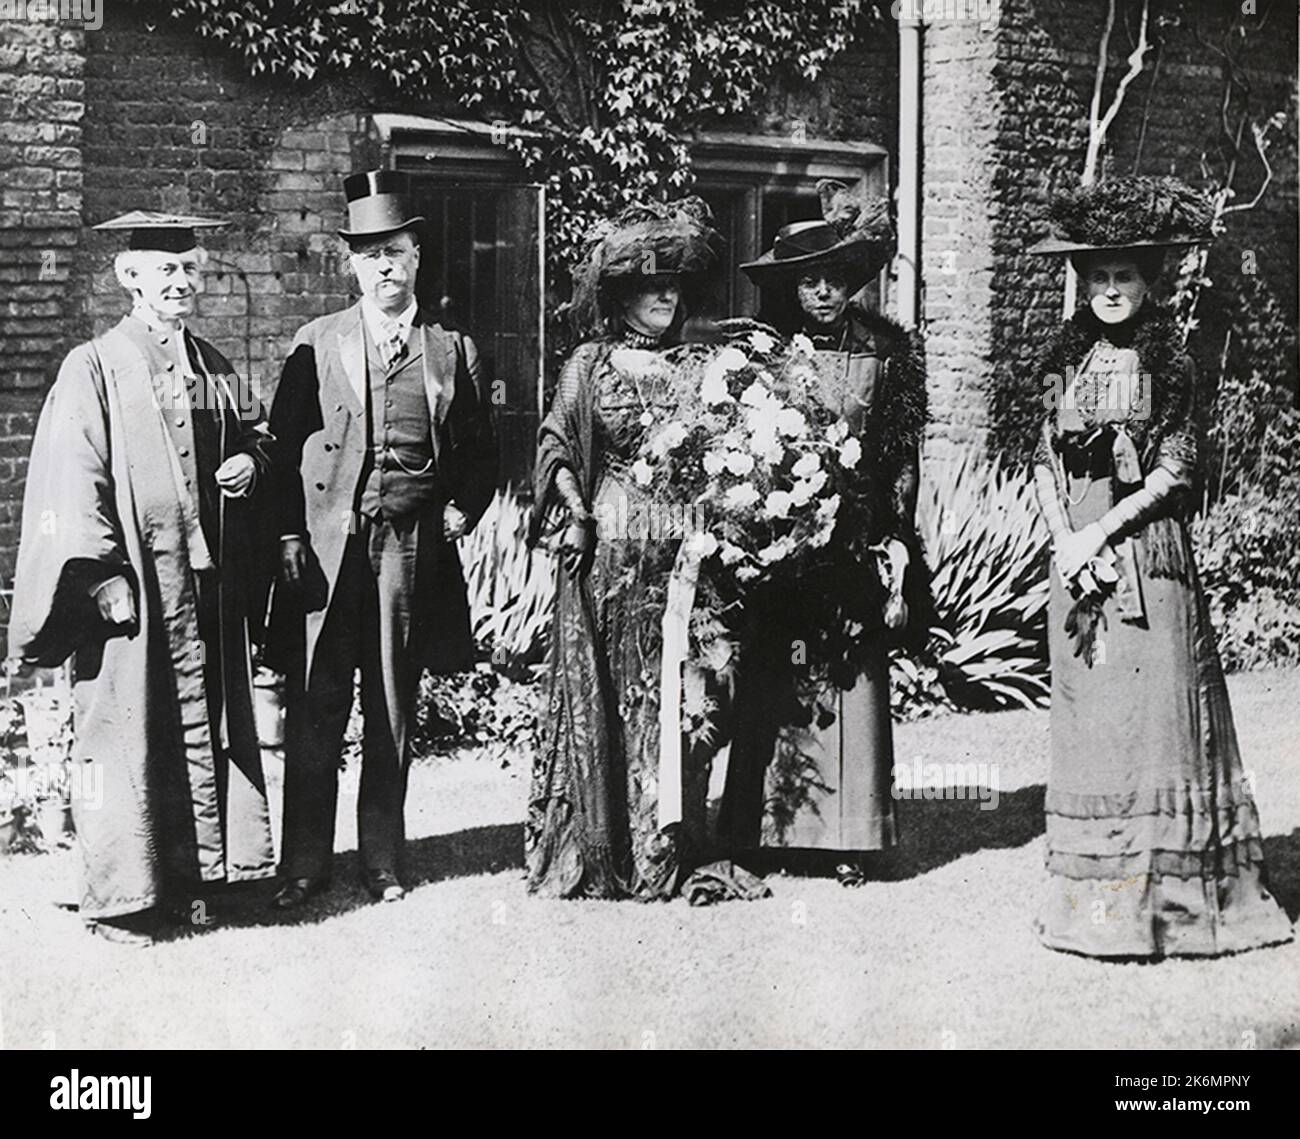 On May 26, 1910, Former President Theodore Roosevelt, after receiving an honorary degree of Doctor of Laws from the University of Cambridge, delivered a speech to the Cambridge Union.  Shown, left to right, are Arthur James Mason, English clergyman and Vice-Chancellor of the University of Cambridge, former President Theodore Roosevelt, Mrs. Edith Kermit Carow Roosevelt, Theodore Roosevelt's second wife, Mrs. Alice Lee Roosevelt Longsworth, Theodore Roosevelt's daughter, and Mrs. Mary Margaret Blore Mason, Canon Mason's wife. Stock Photo